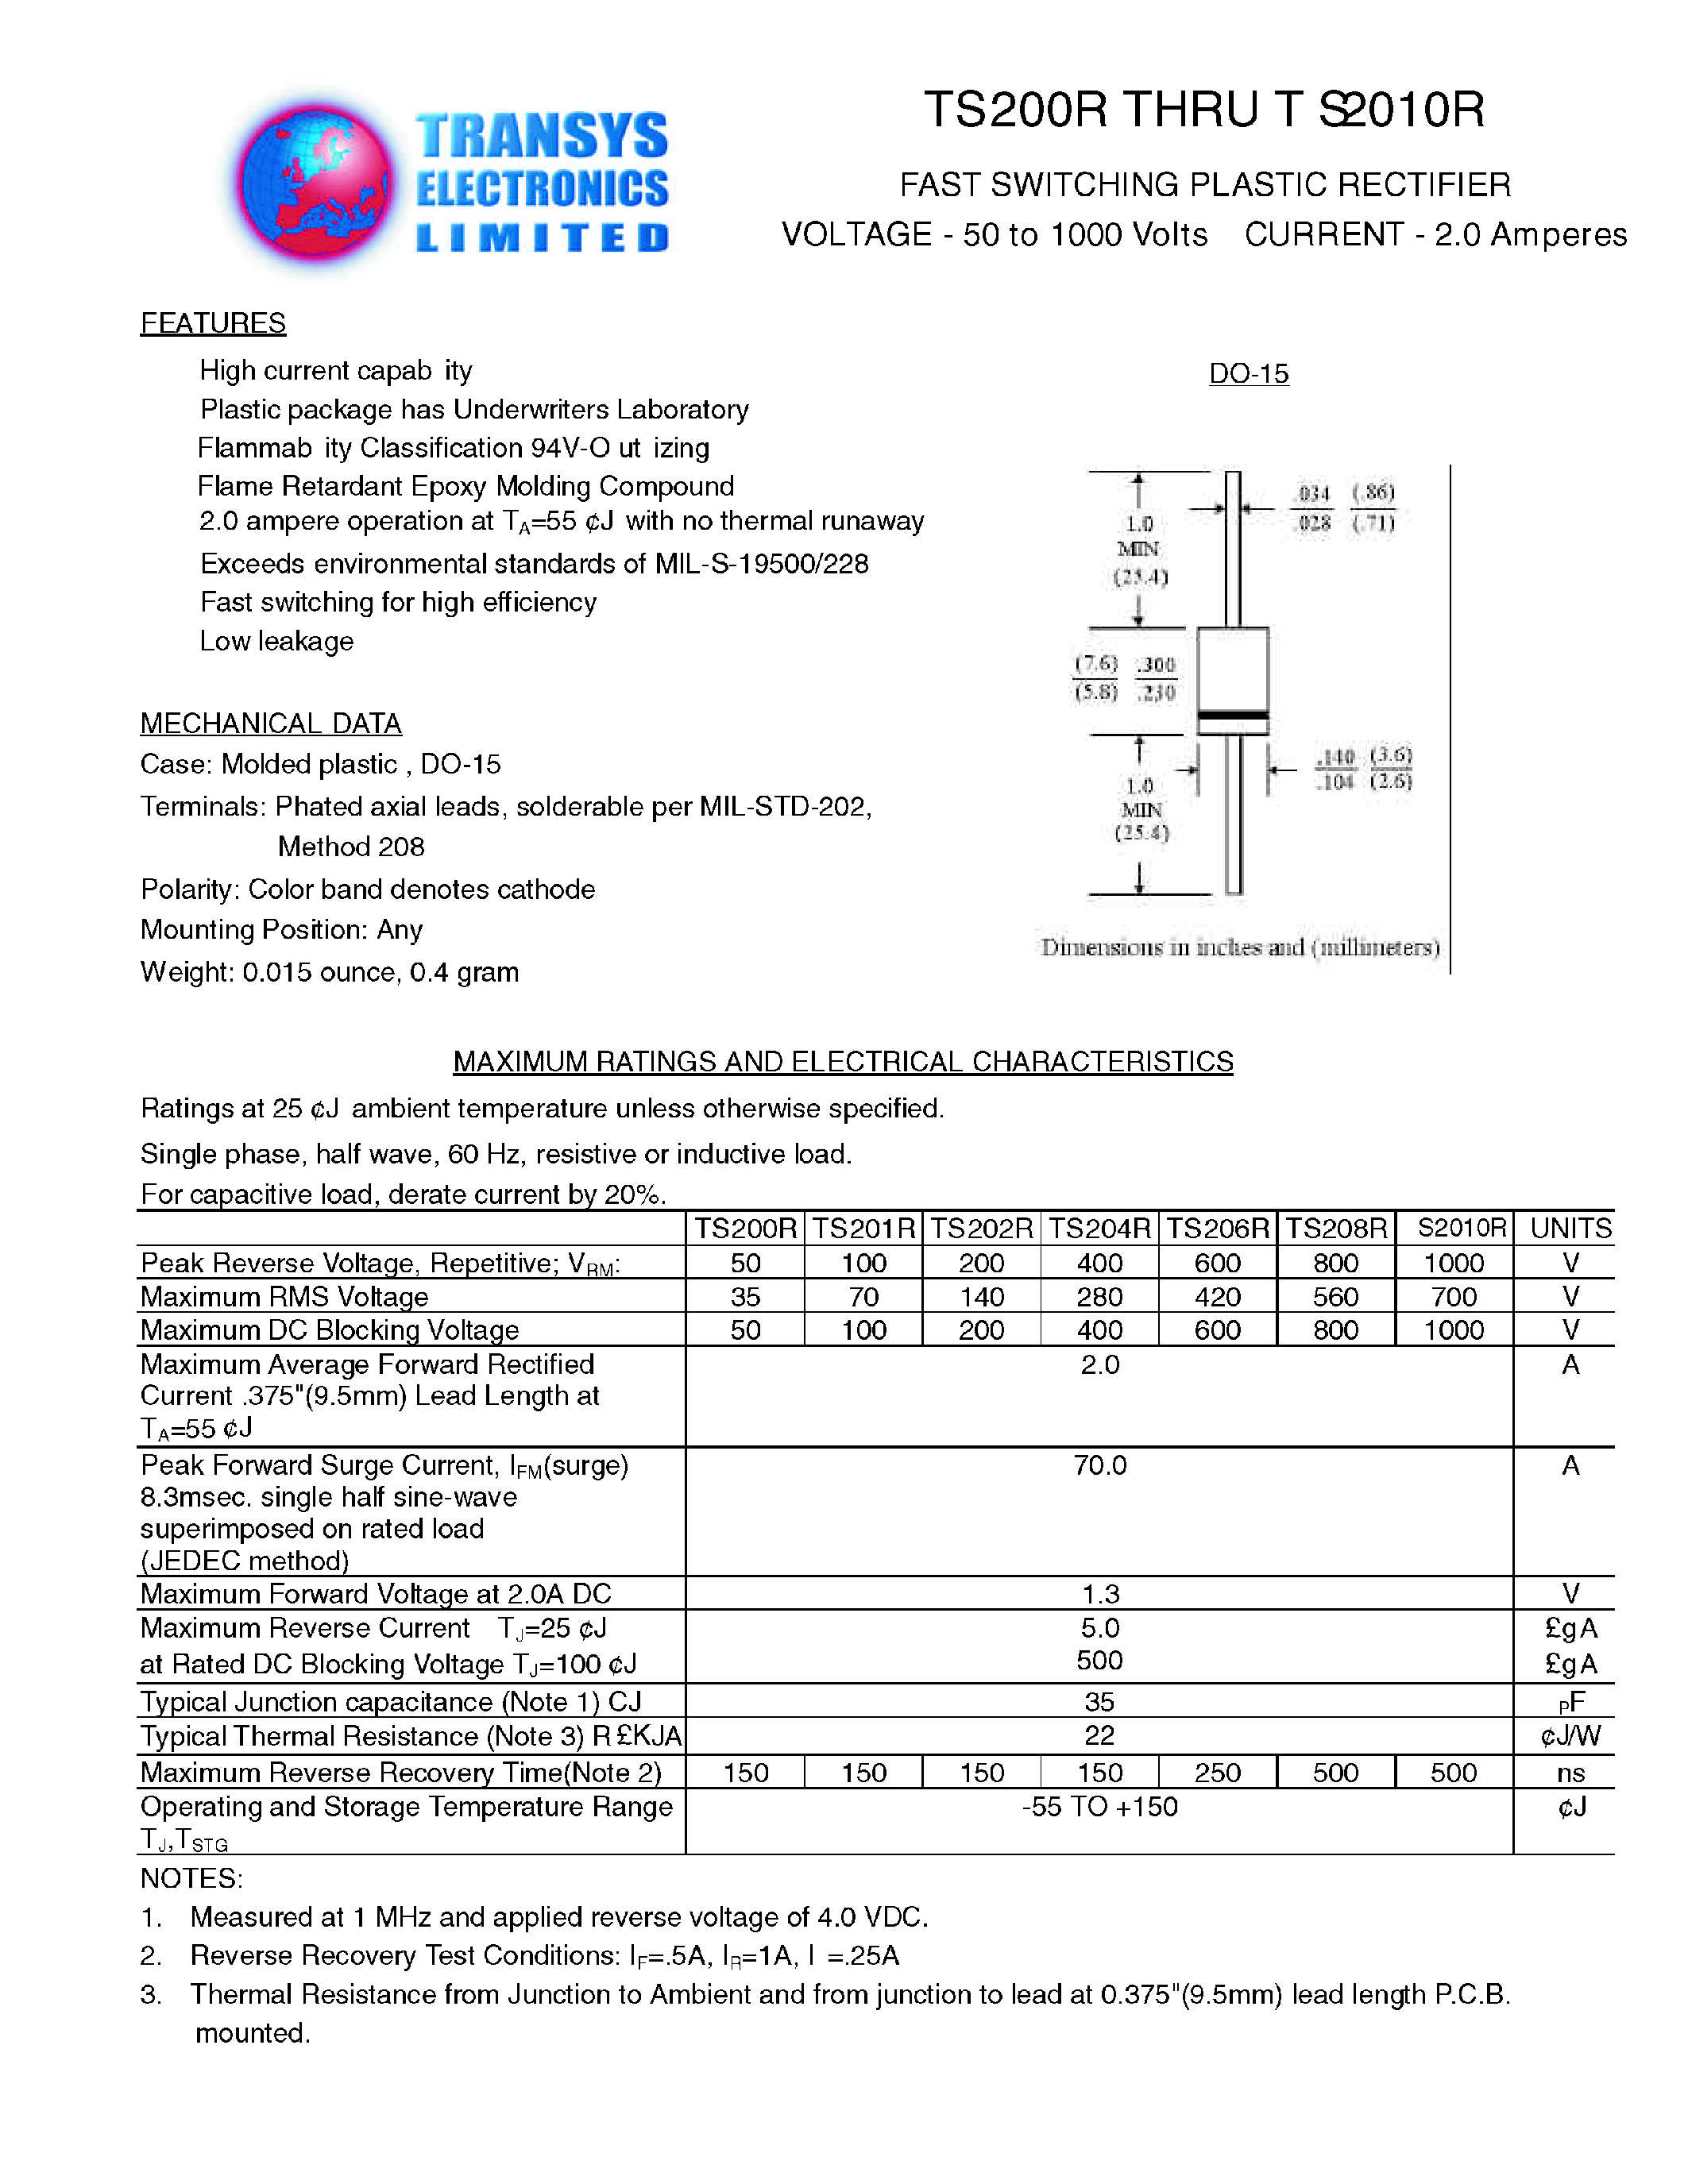 Datasheet TS206R - FAST SWITCHIING RECTIFIER(Reverse Voltage - 50 to 1000 Volts/ Current - 2.0Ampere) page 1